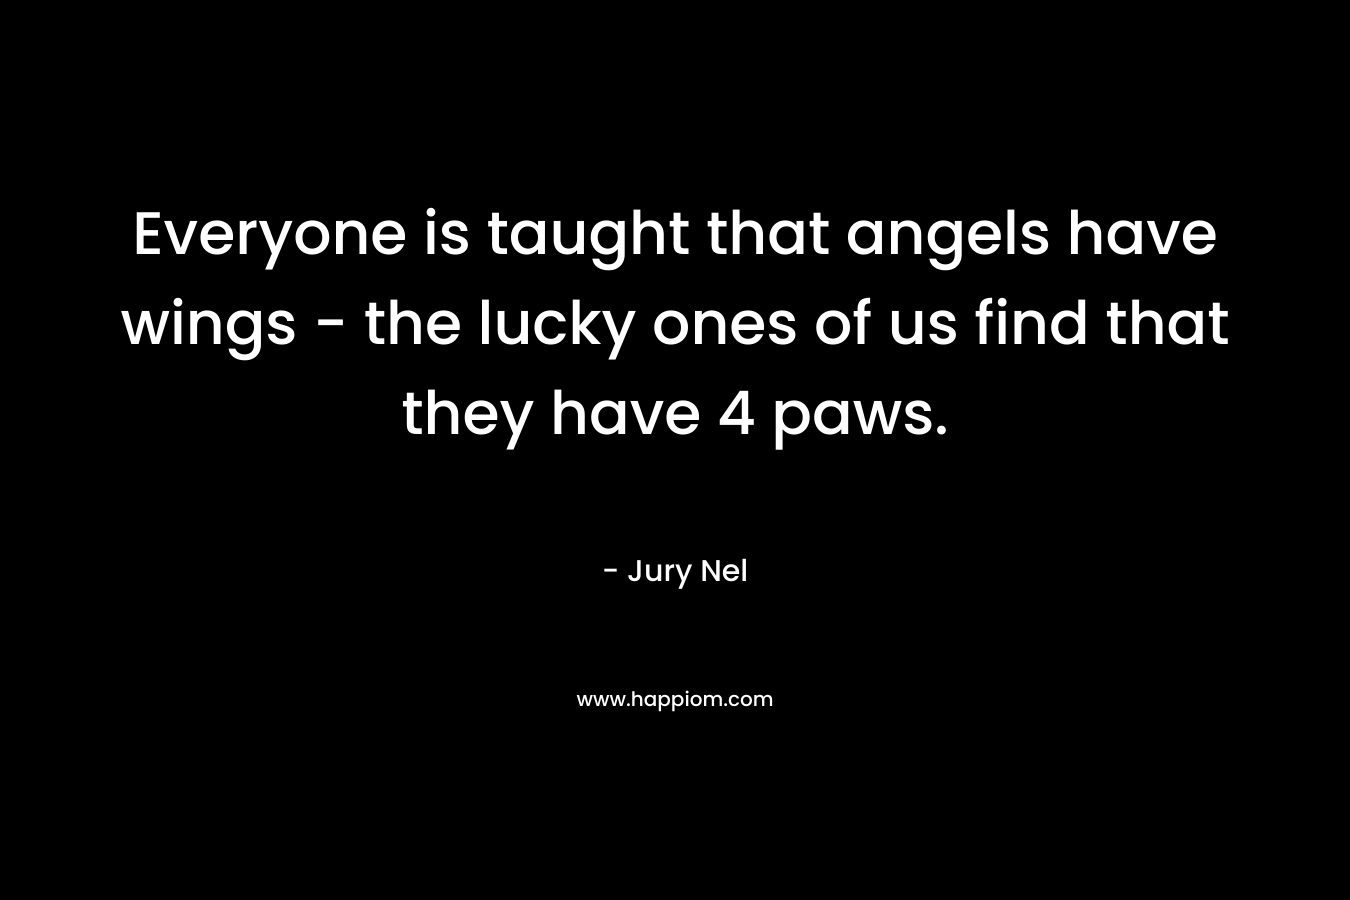 Everyone is taught that angels have wings - the lucky ones of us find that they have 4 paws.